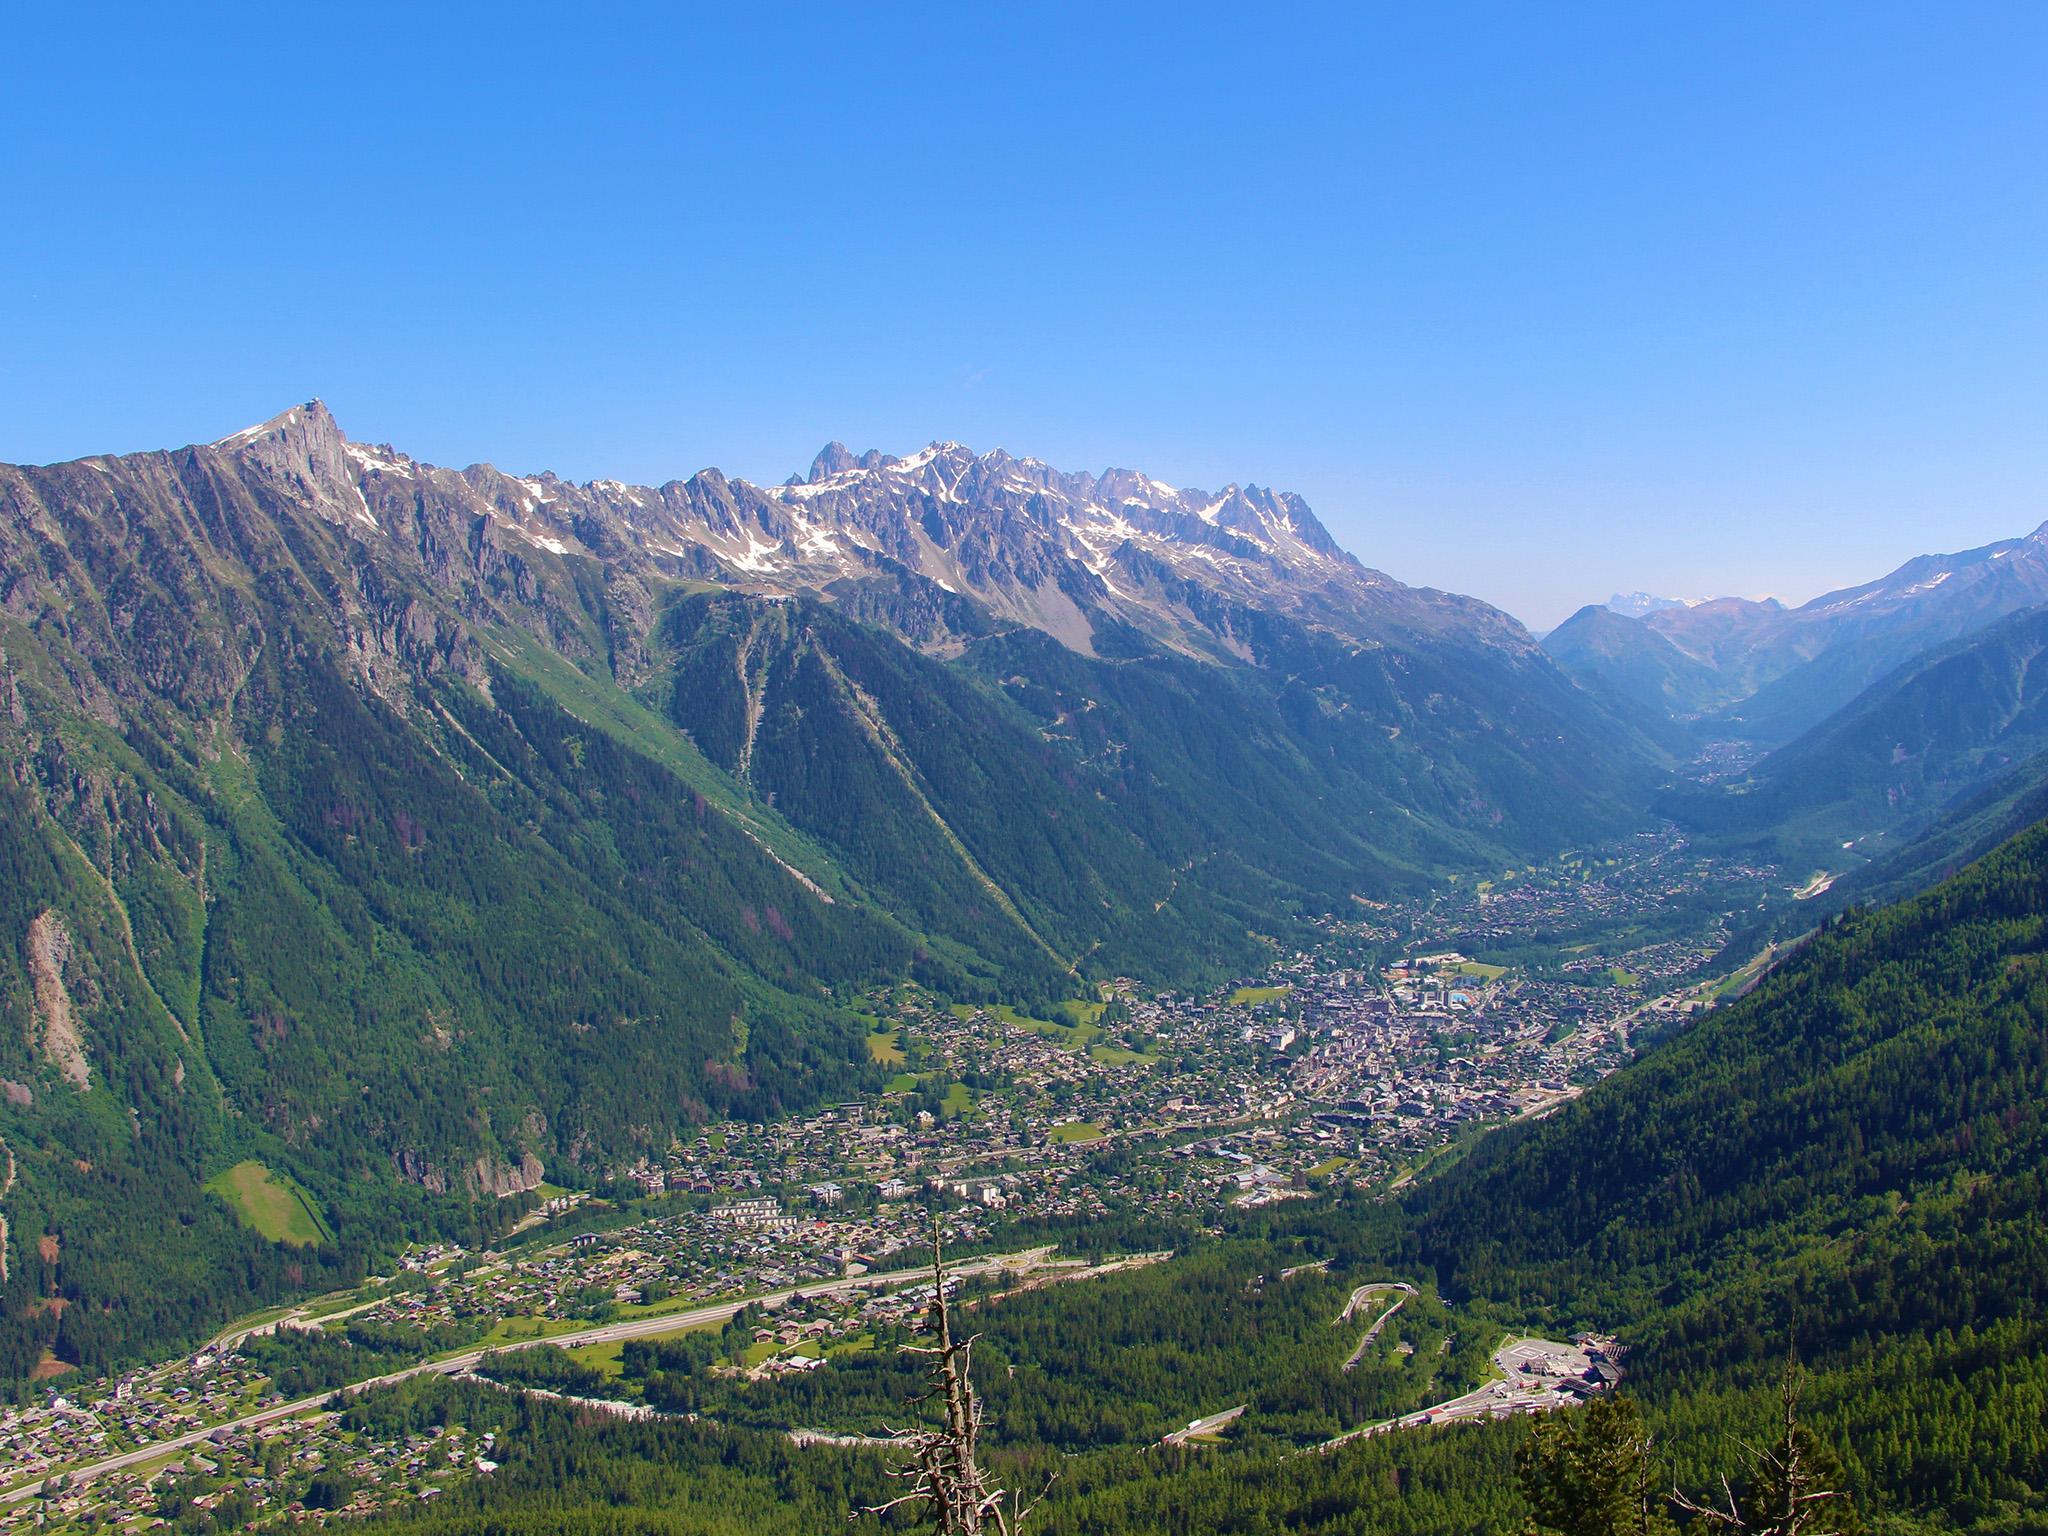 The Alpine town of Chamonix has a vast array of trails